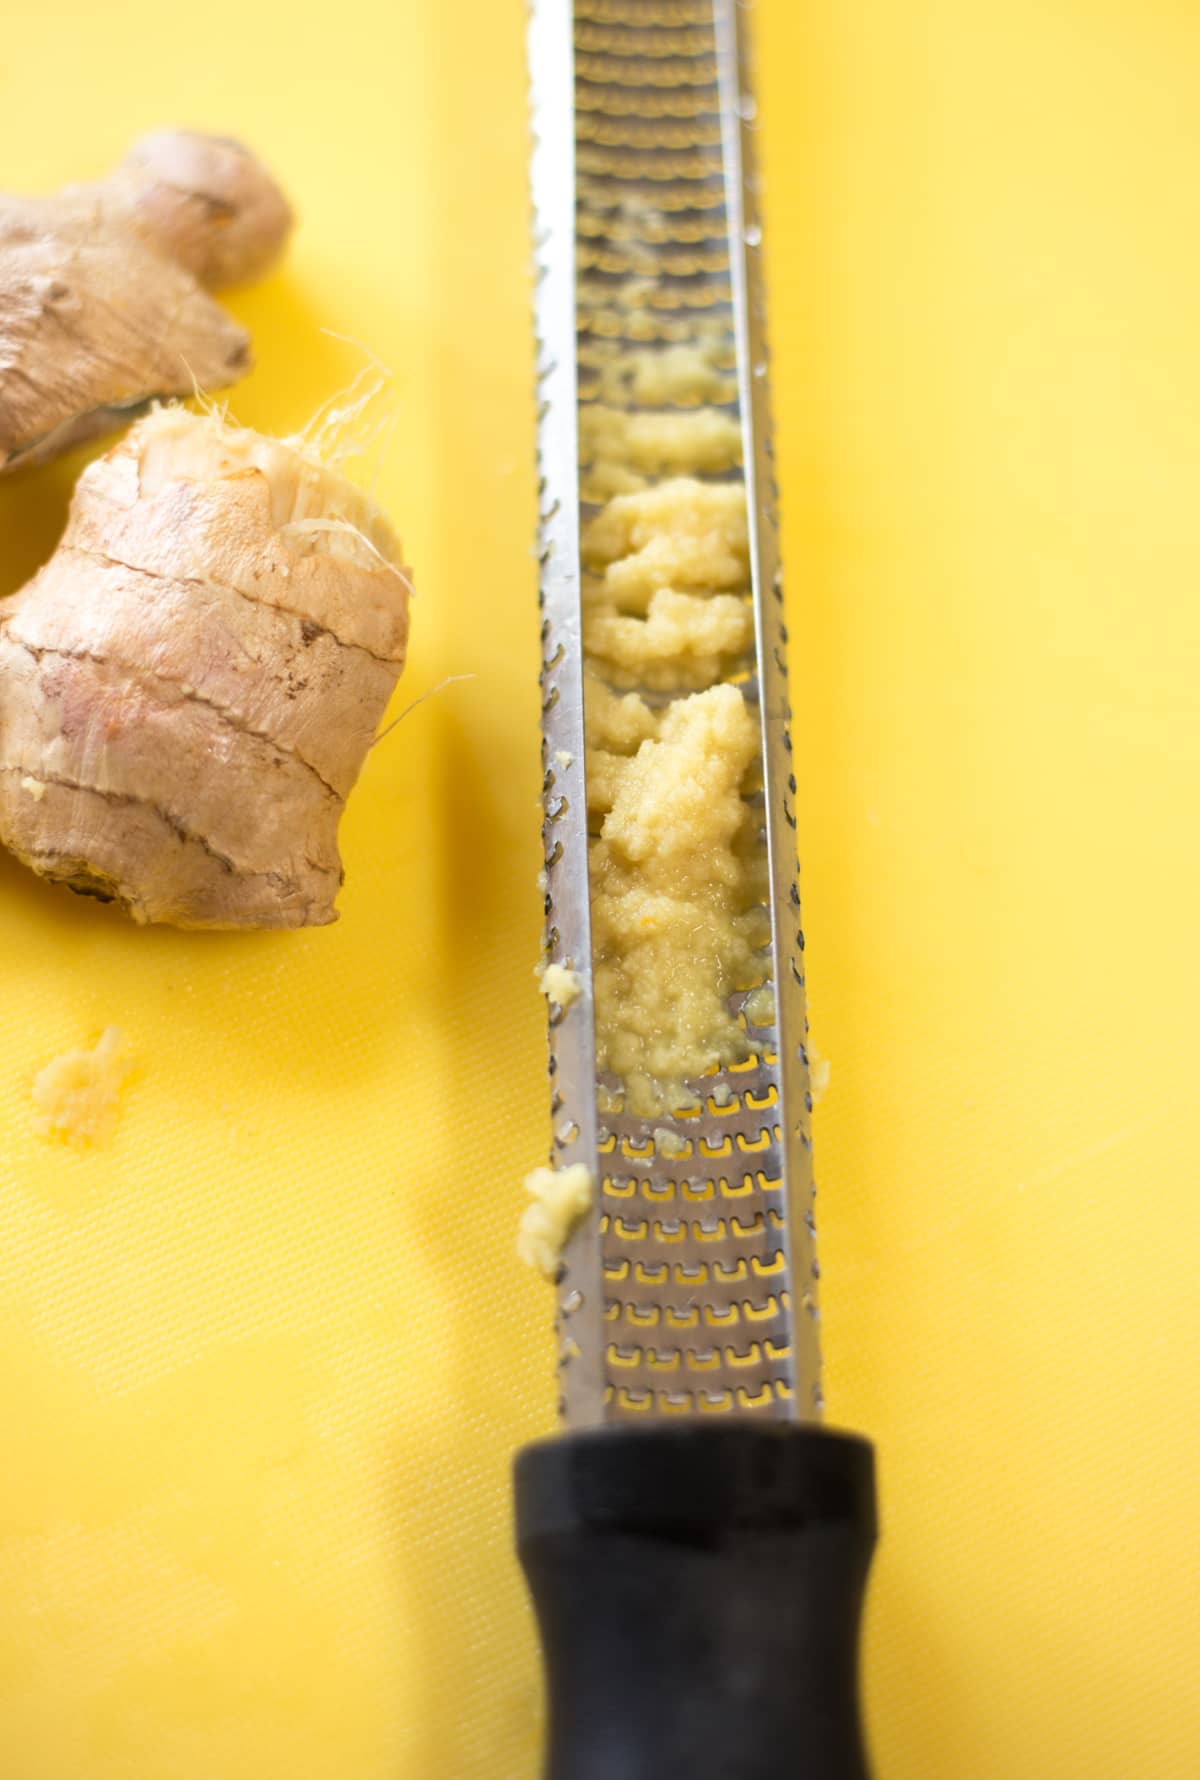 Grating Ginger, Yellow Background